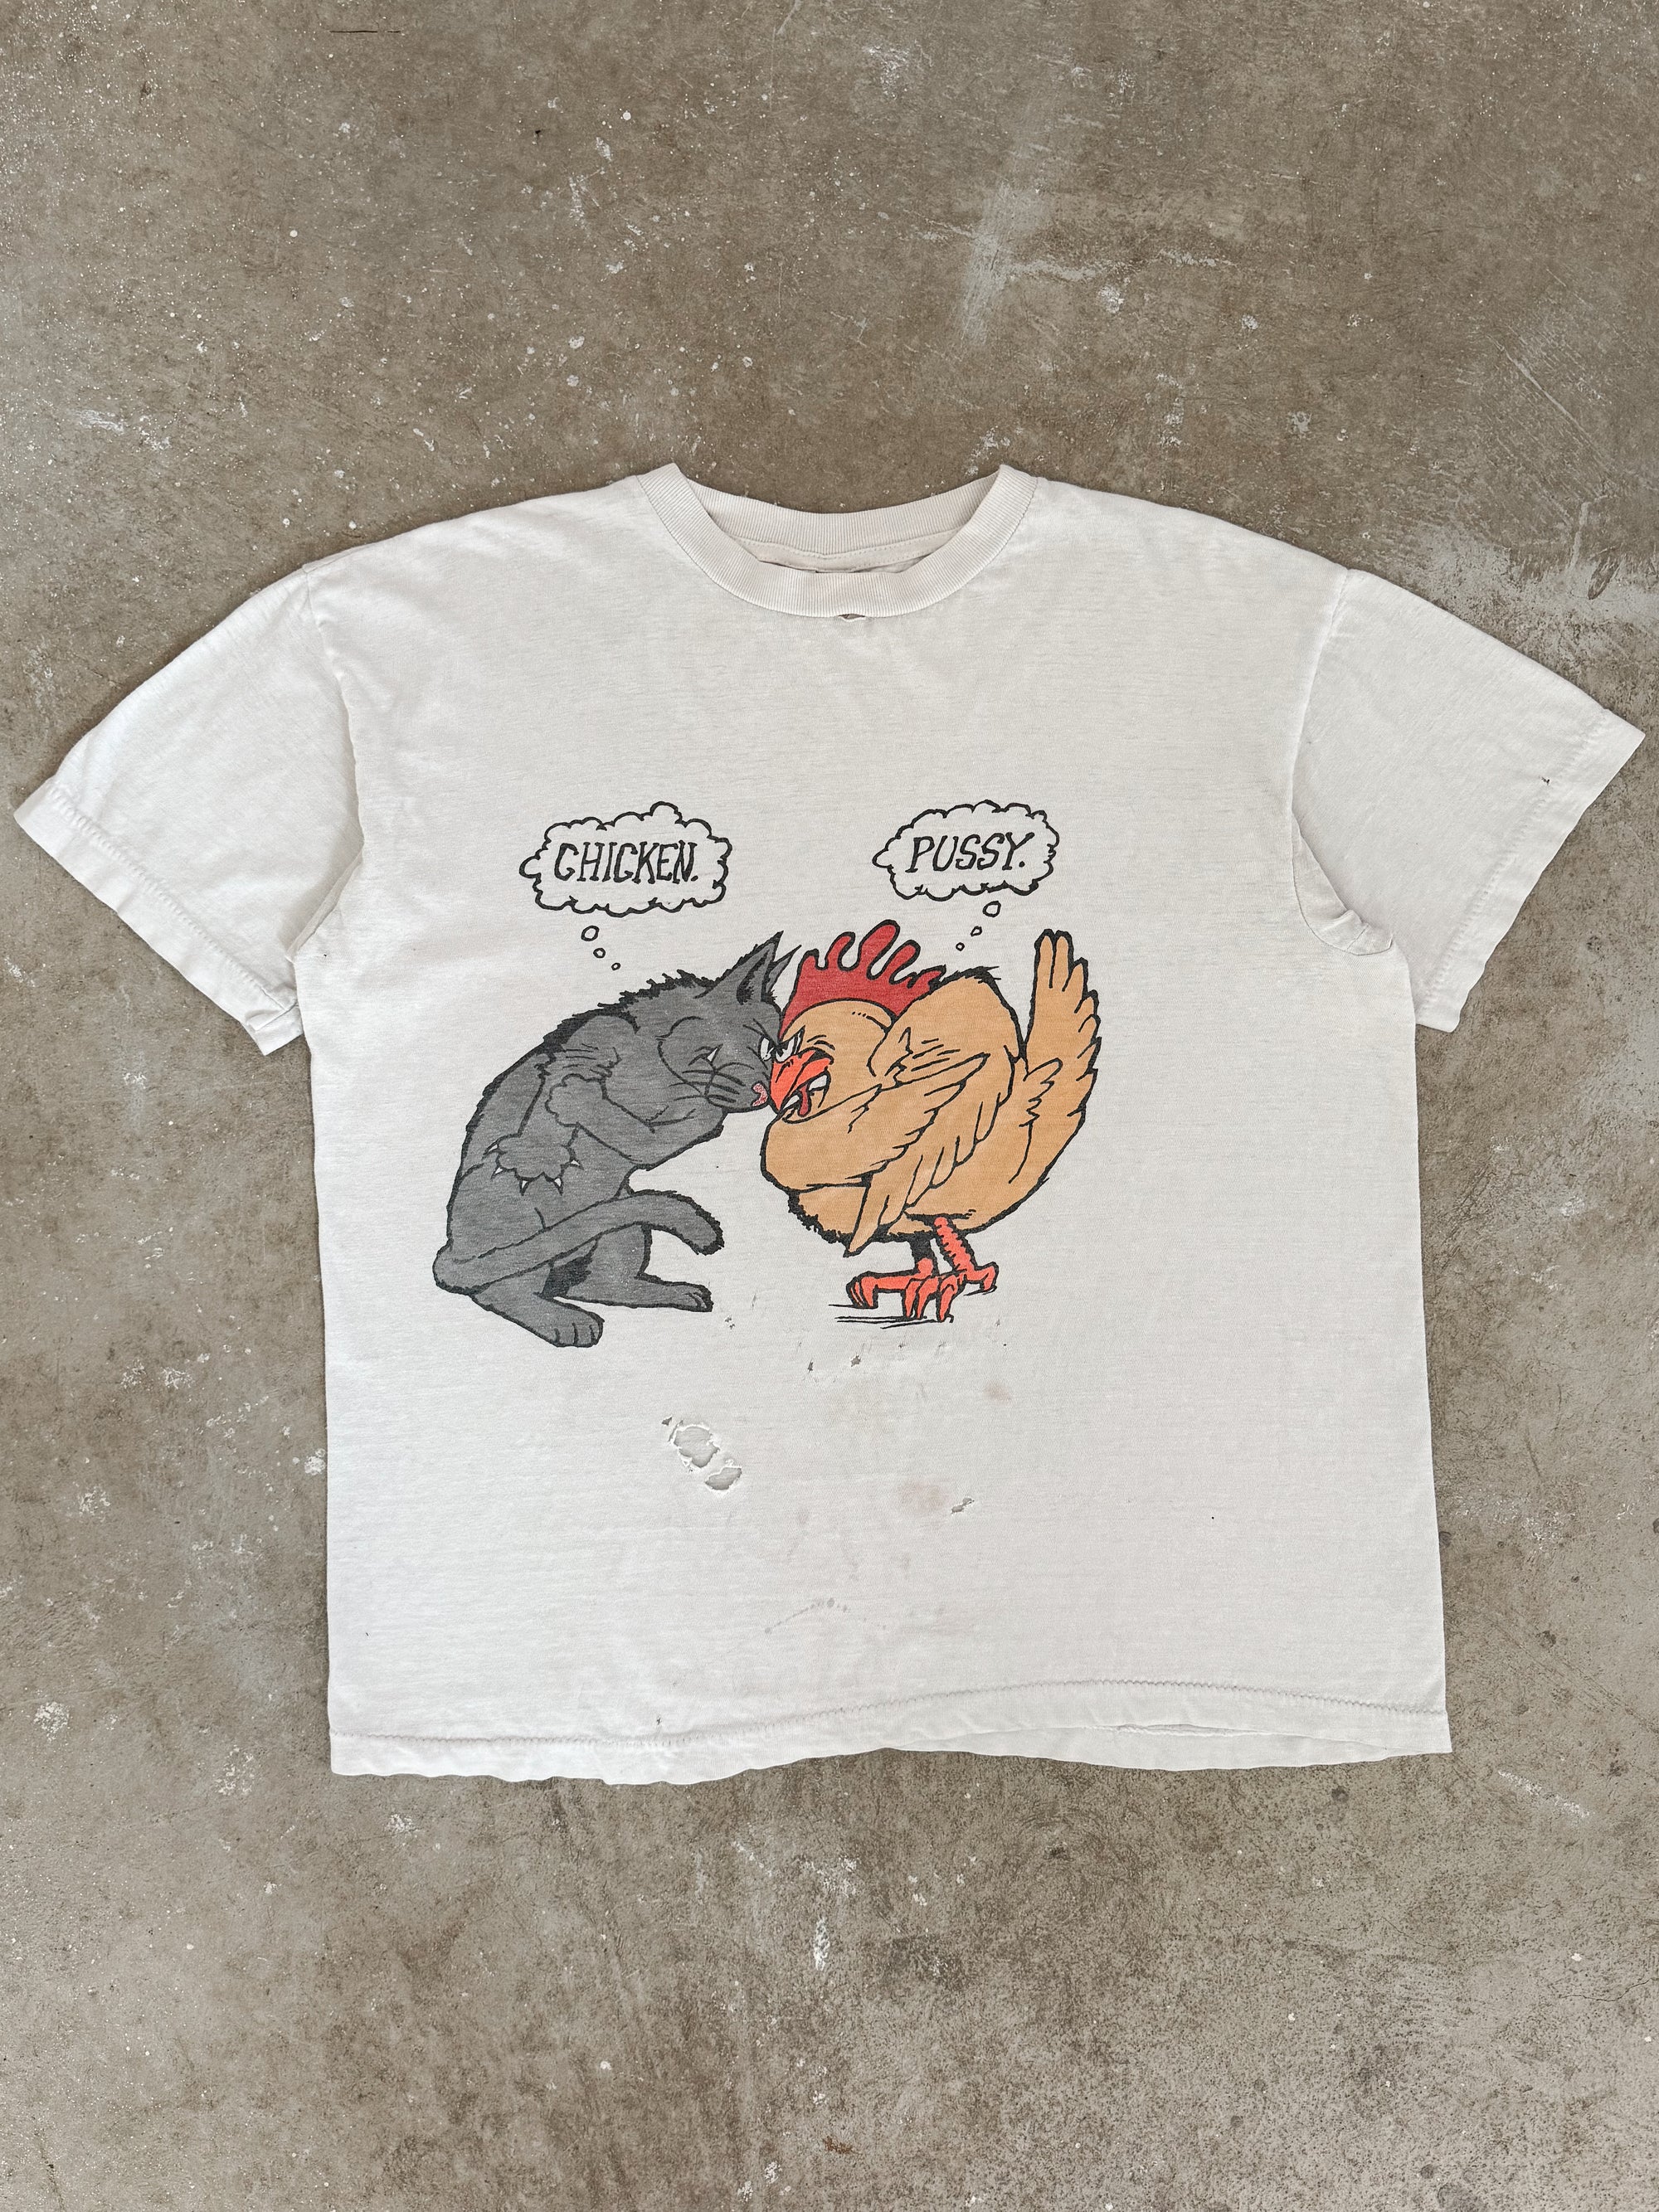 1990s "Chicken Pussy" Tee (L)